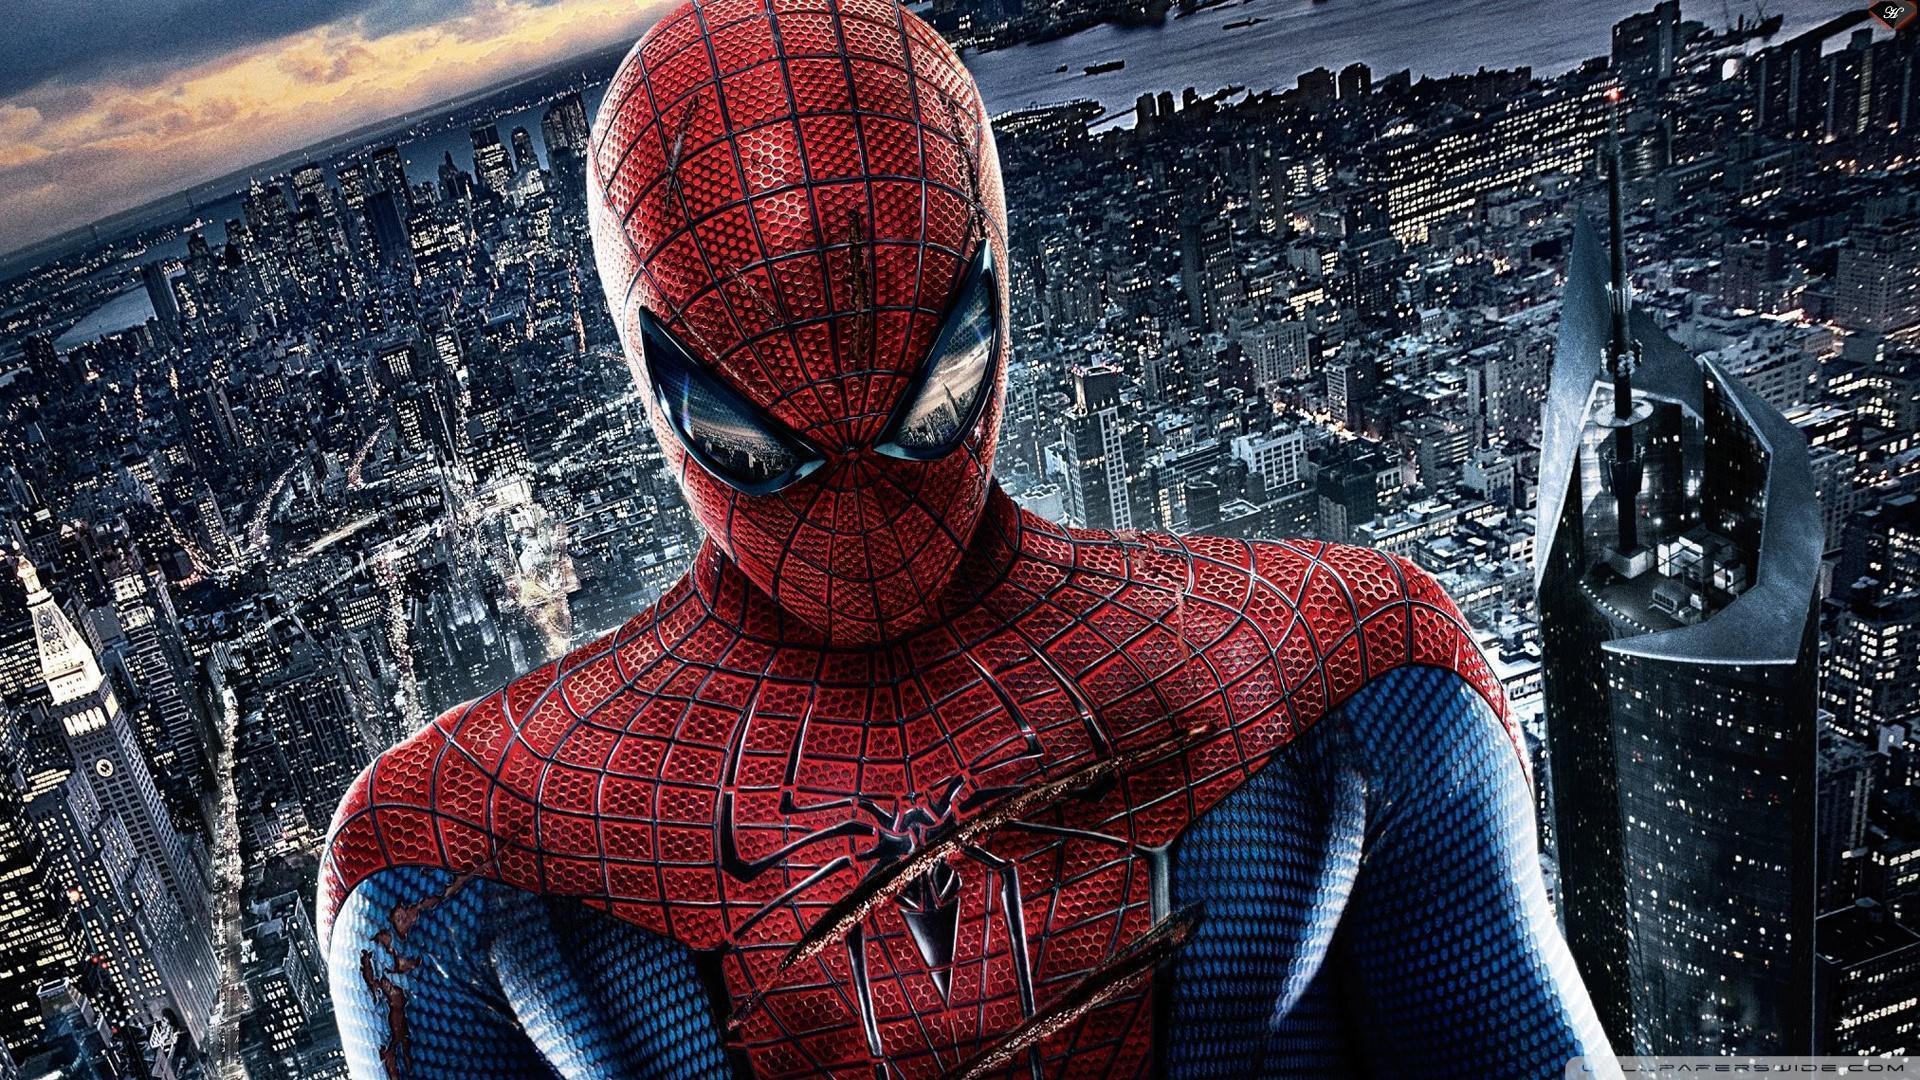 The Amazing Spider Man HD desktop wallpapers : High Definition